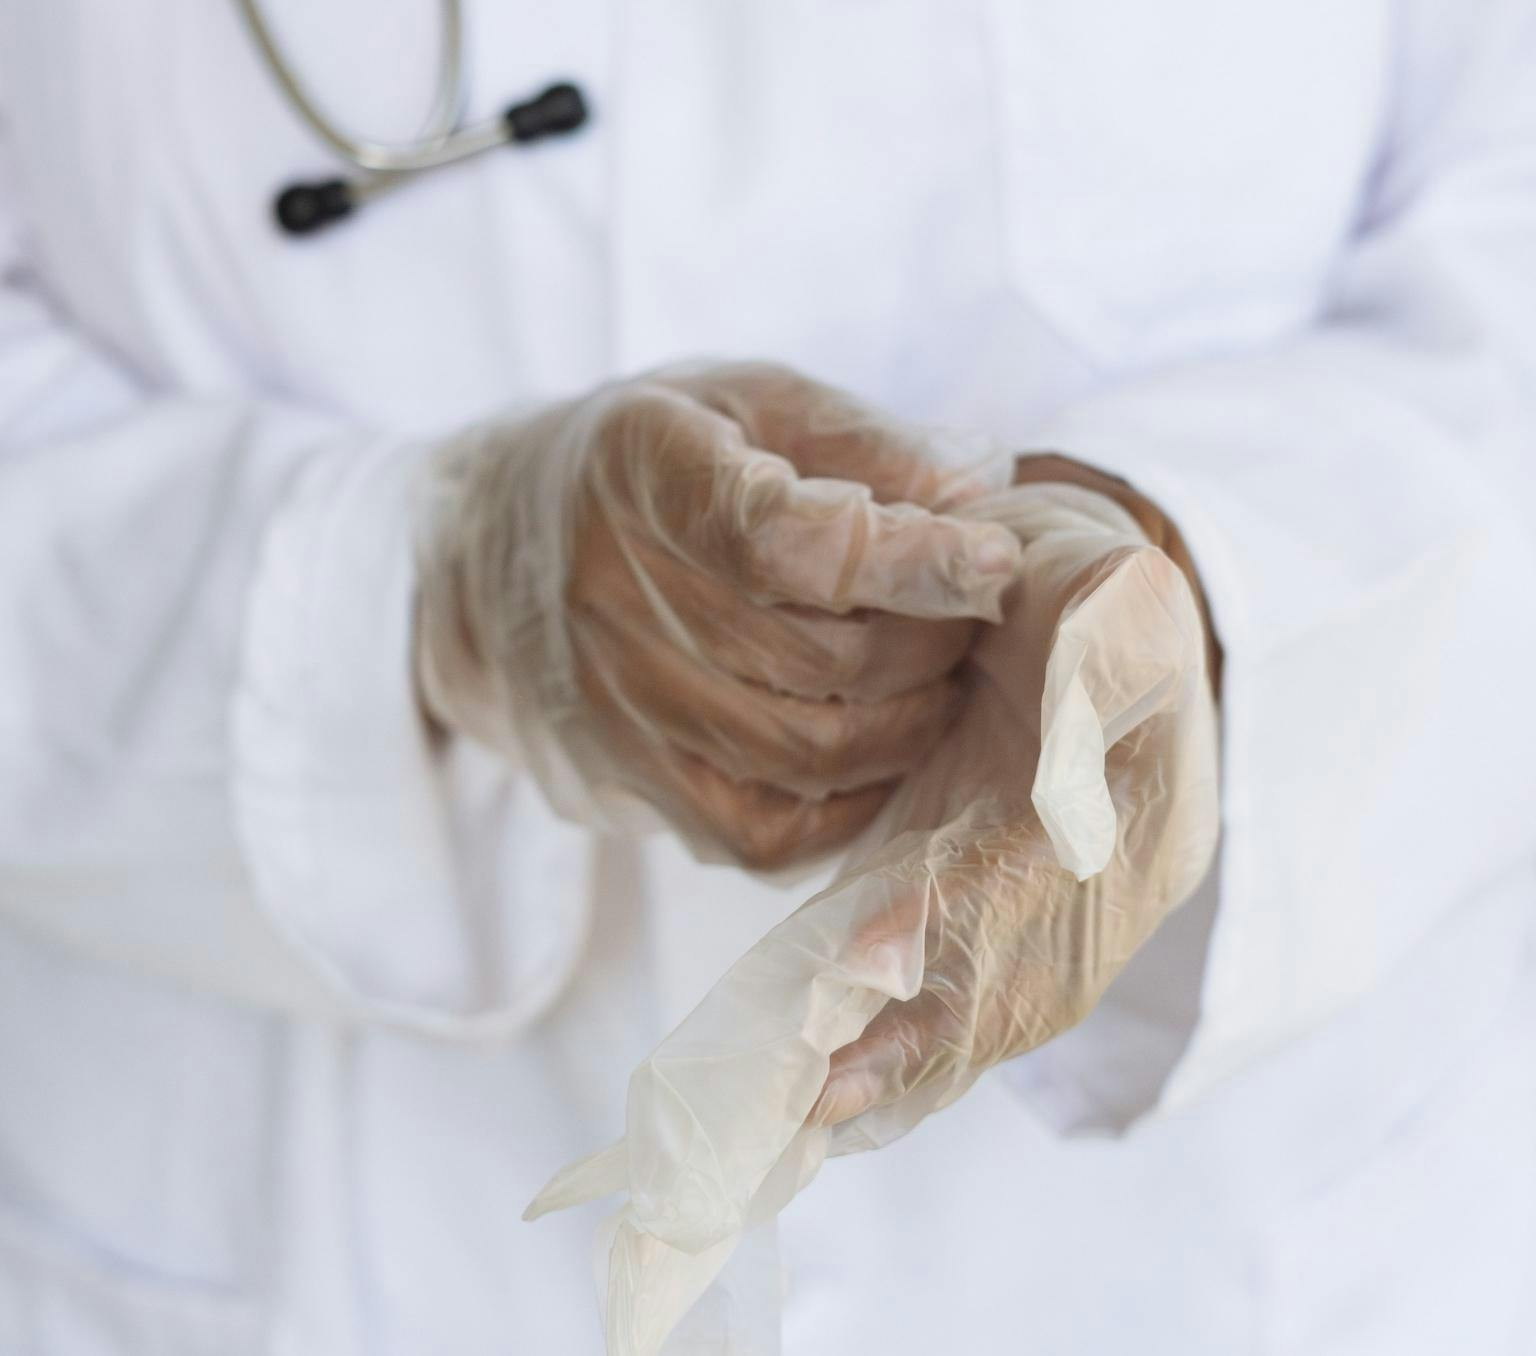 Close up of a person's hands putting on clear plastic gloves. The person is wearing a white lab coat and has a stethoscope around their neck